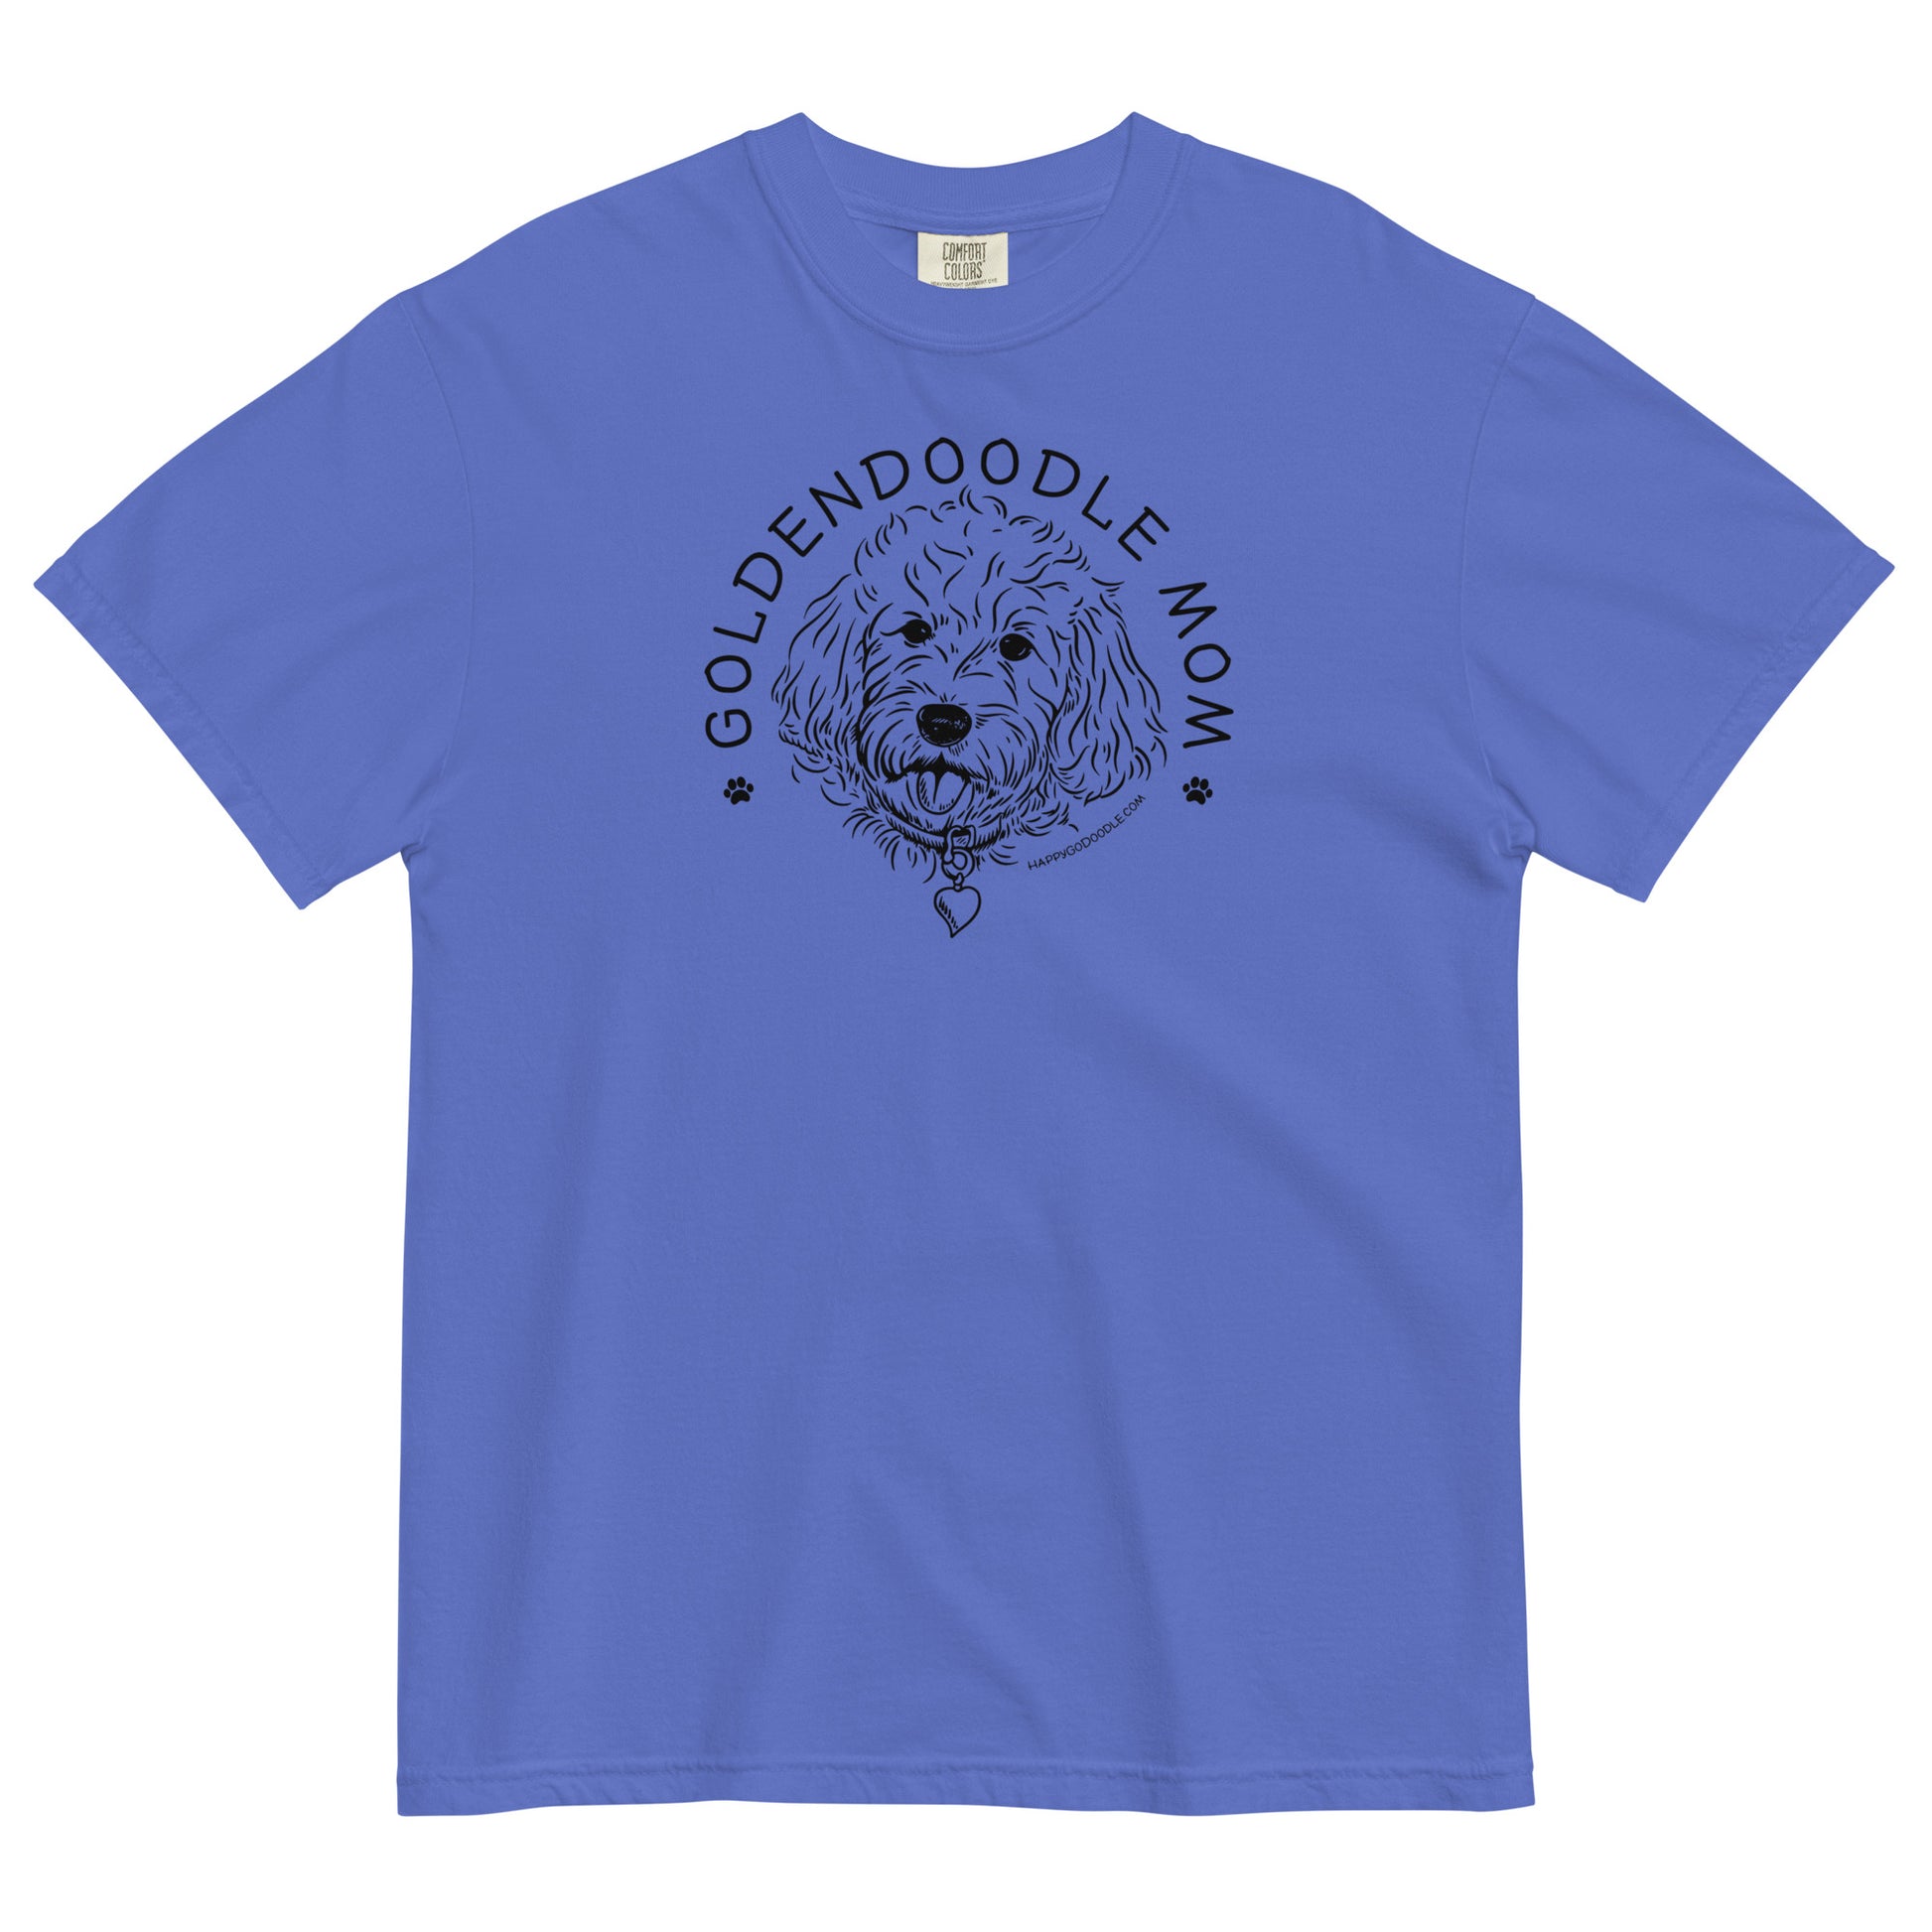 Goldendoodle Mom comfort colors t-shirt with Goldendoodle face and words "Goldendoodle Mom" in flo blue color